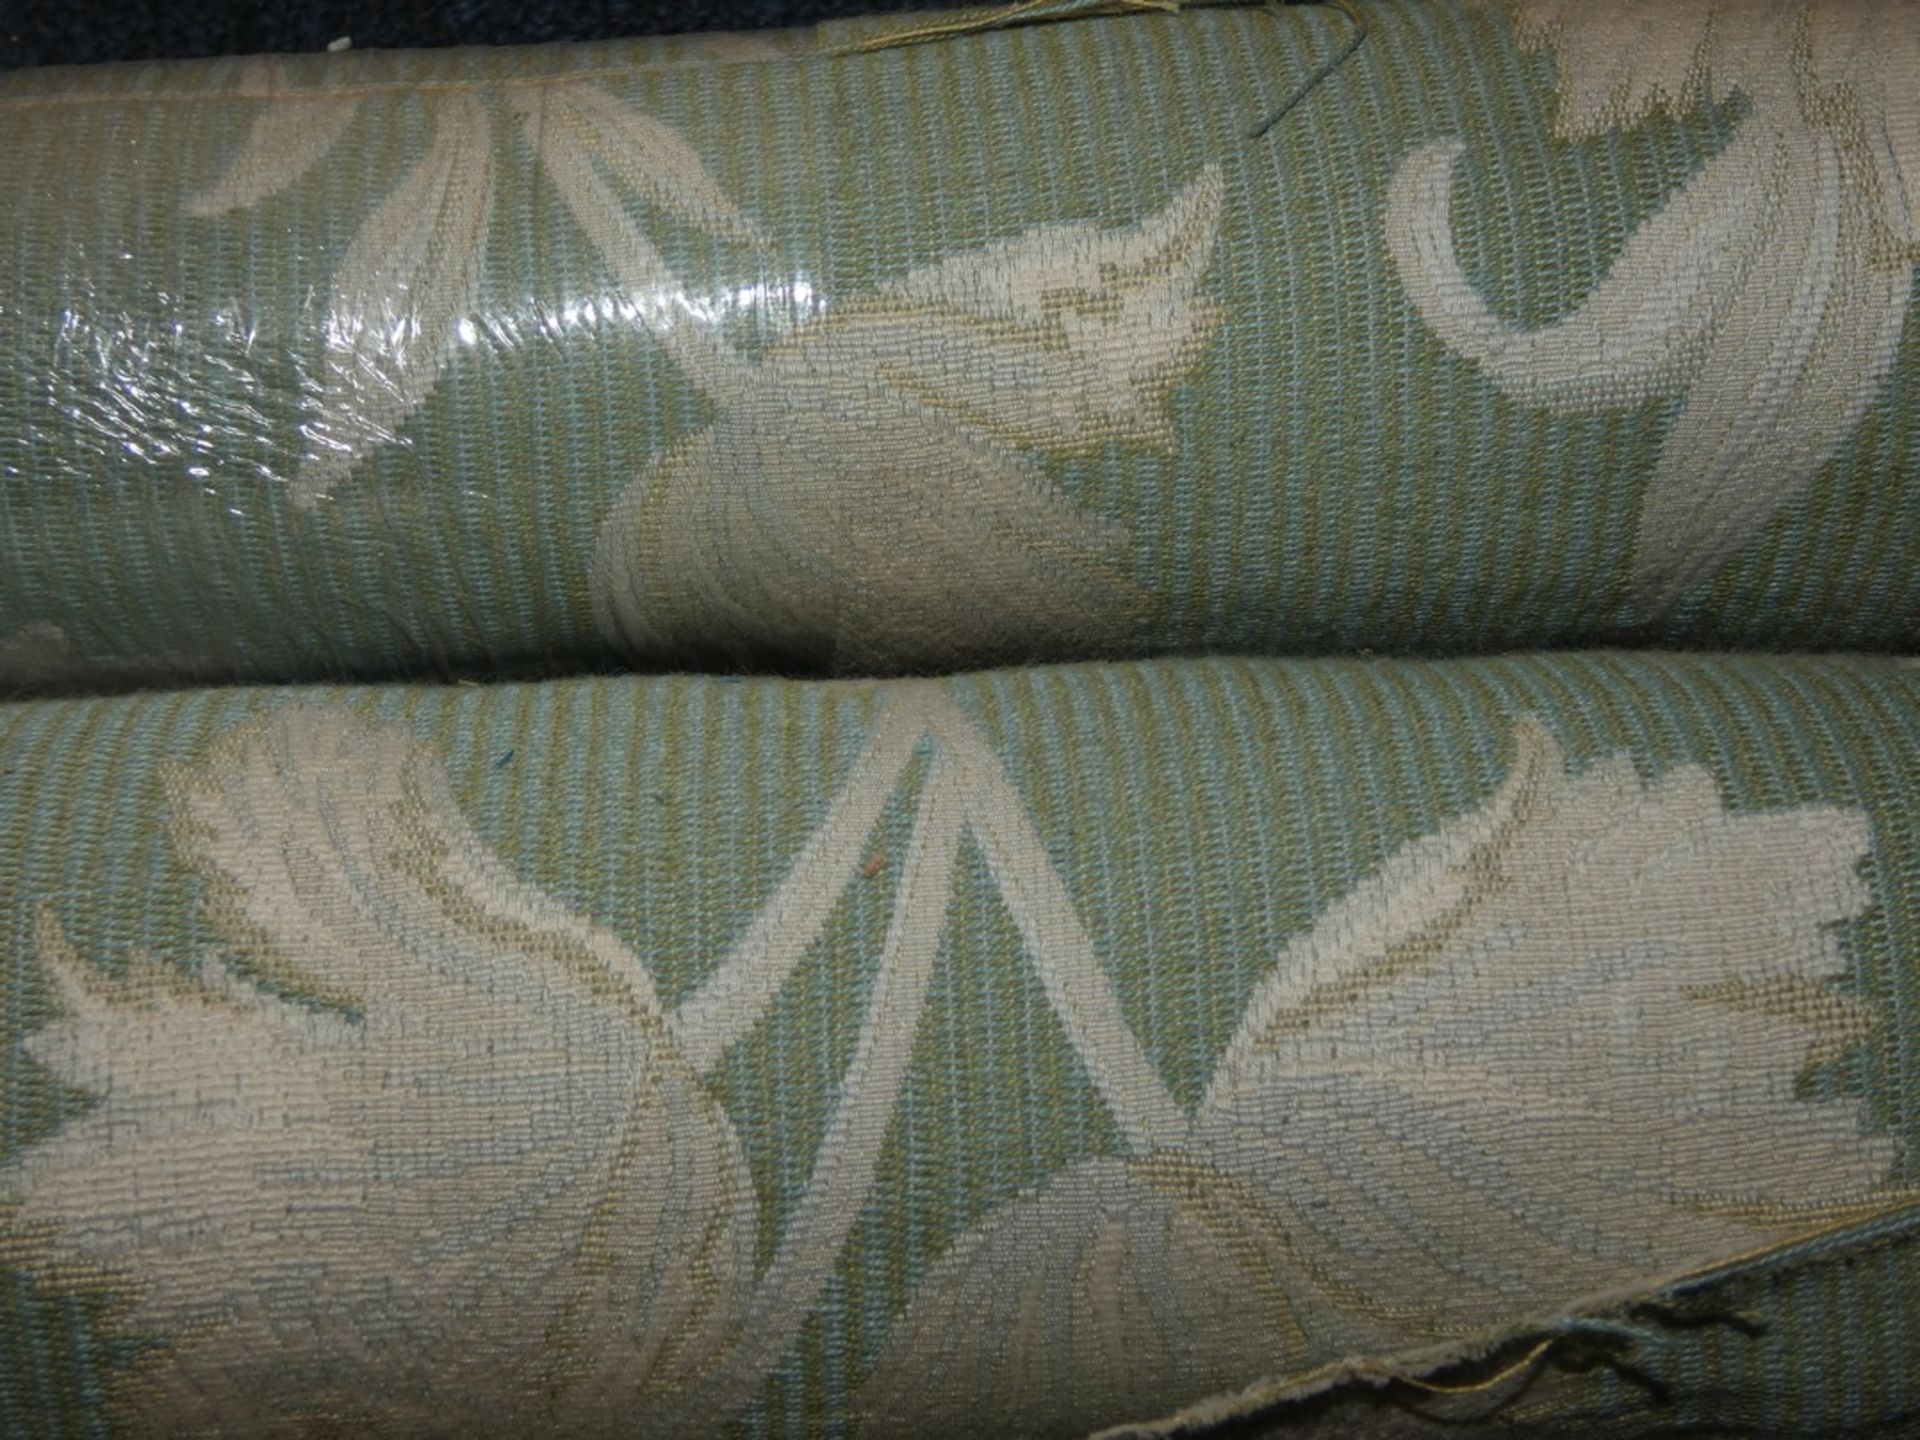 Lot To Contain 2 Rolls Of Green Floral Print Fabric Upholstery Material RRP £80 (1683554) (